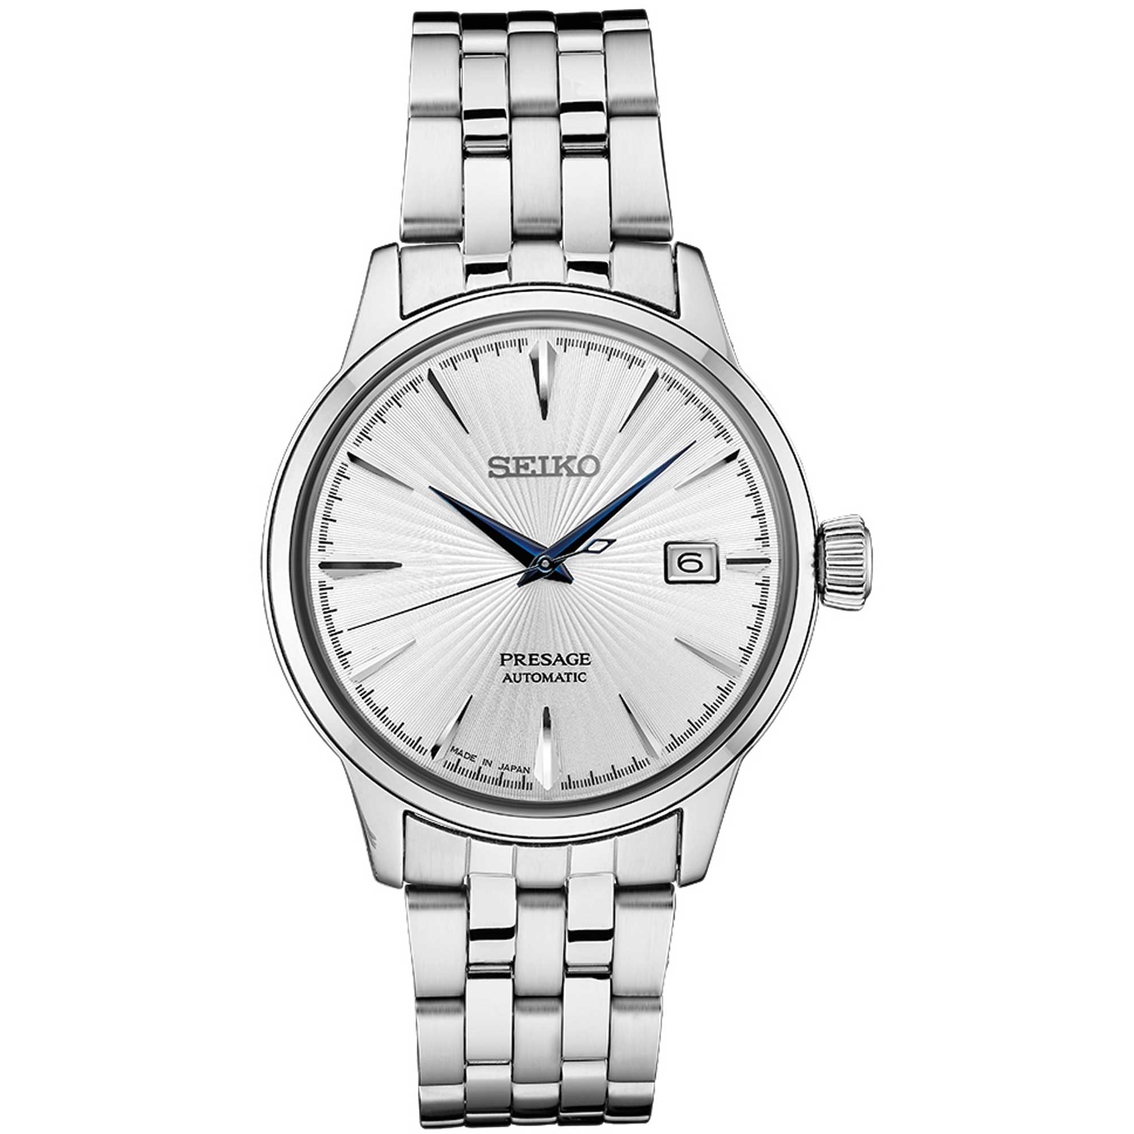 Seiko Men's Presage Stainless Steel Watch With Silver Dial Srpb77 |  Stainless Steel Band | Jewelry & Watches | Shop The Exchange